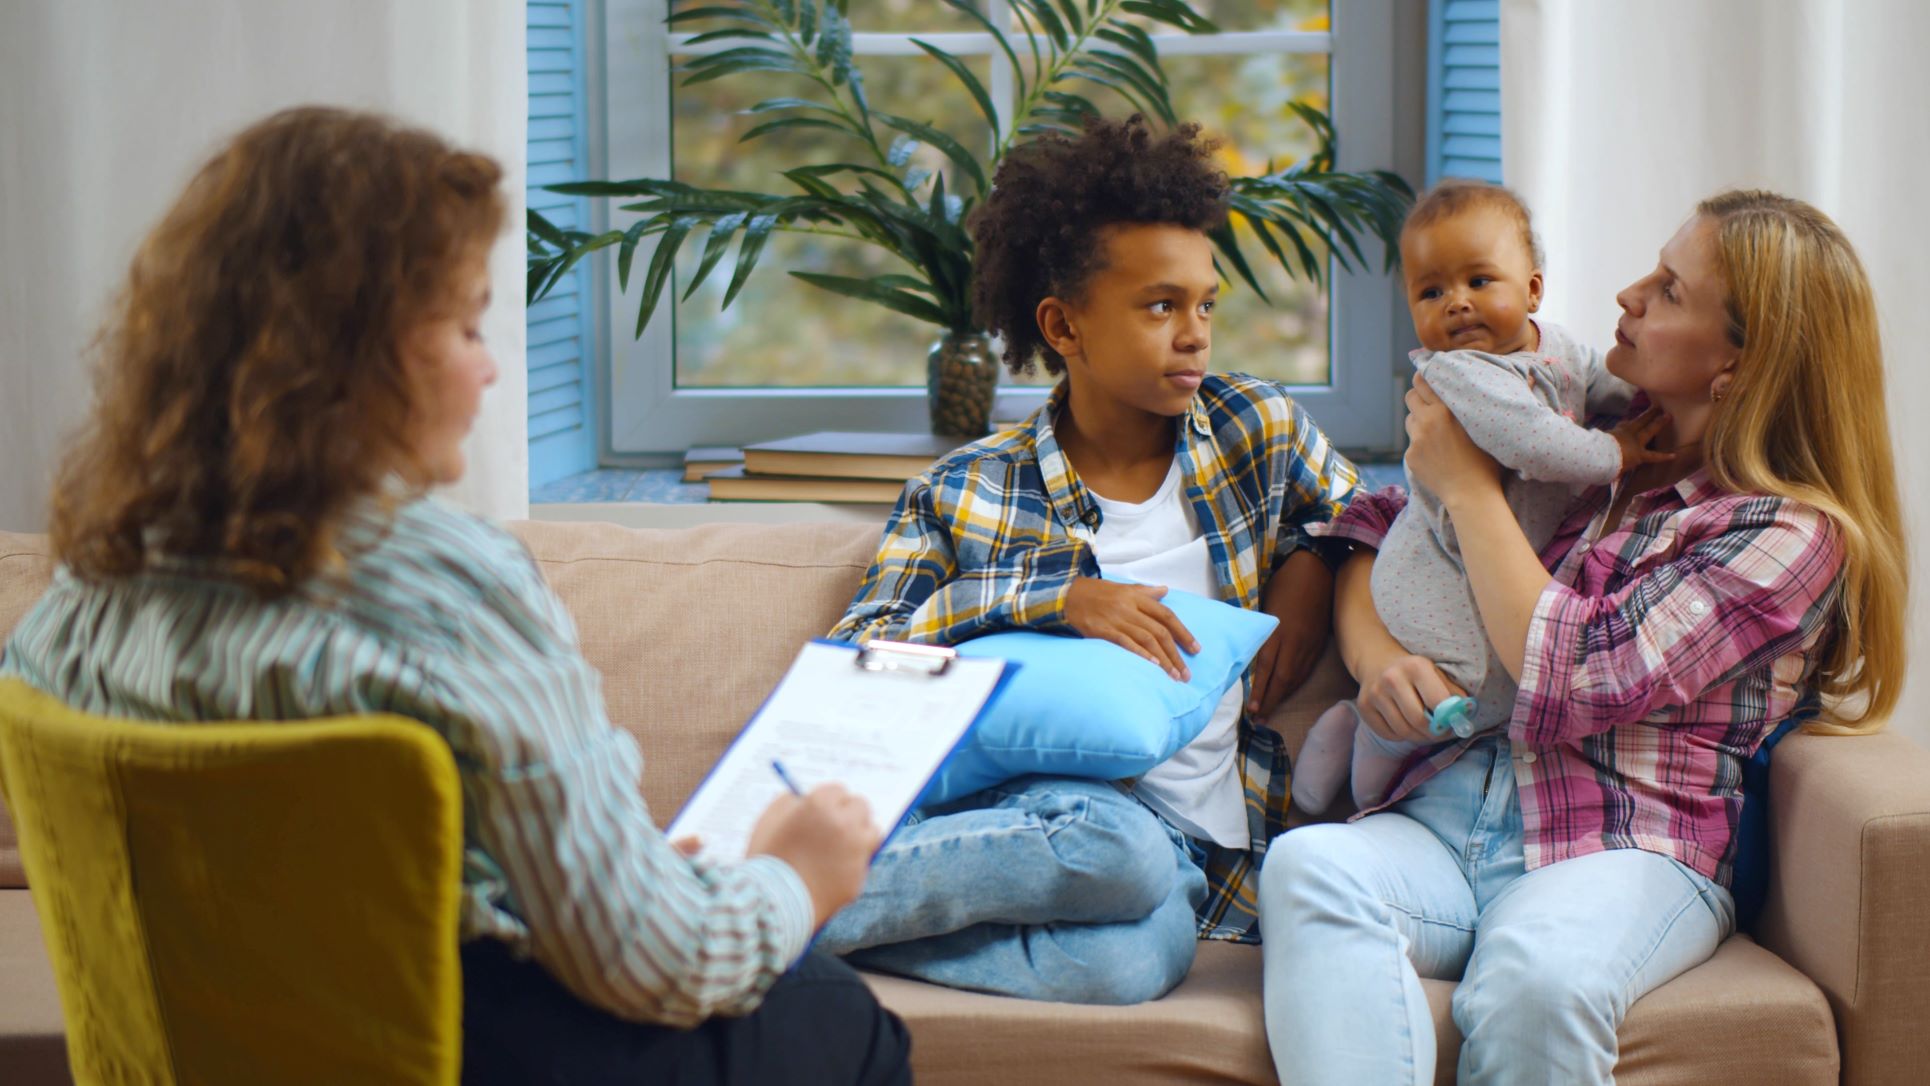 Case worker sitting with young teen, baby, and woman